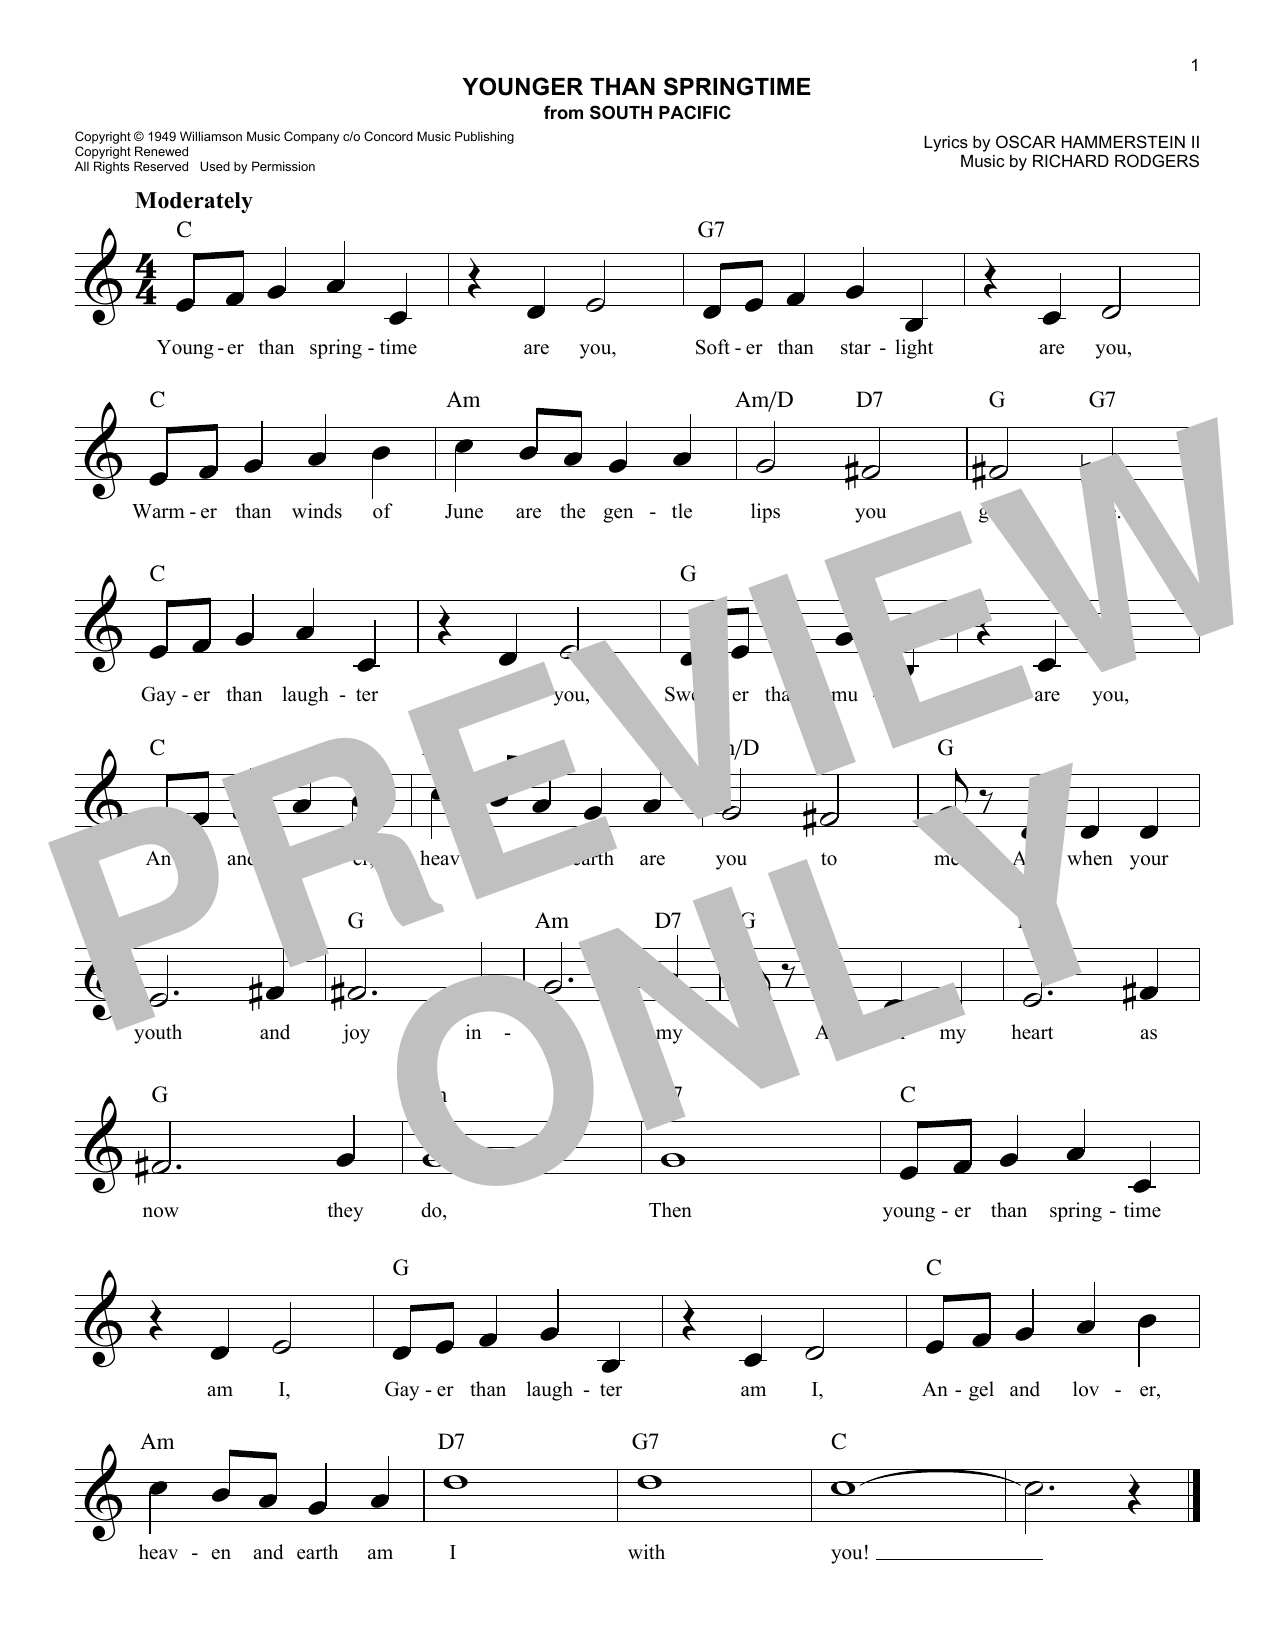 Download Rodgers & Hammerstein Younger Than Springtime (from South Pac Sheet Music